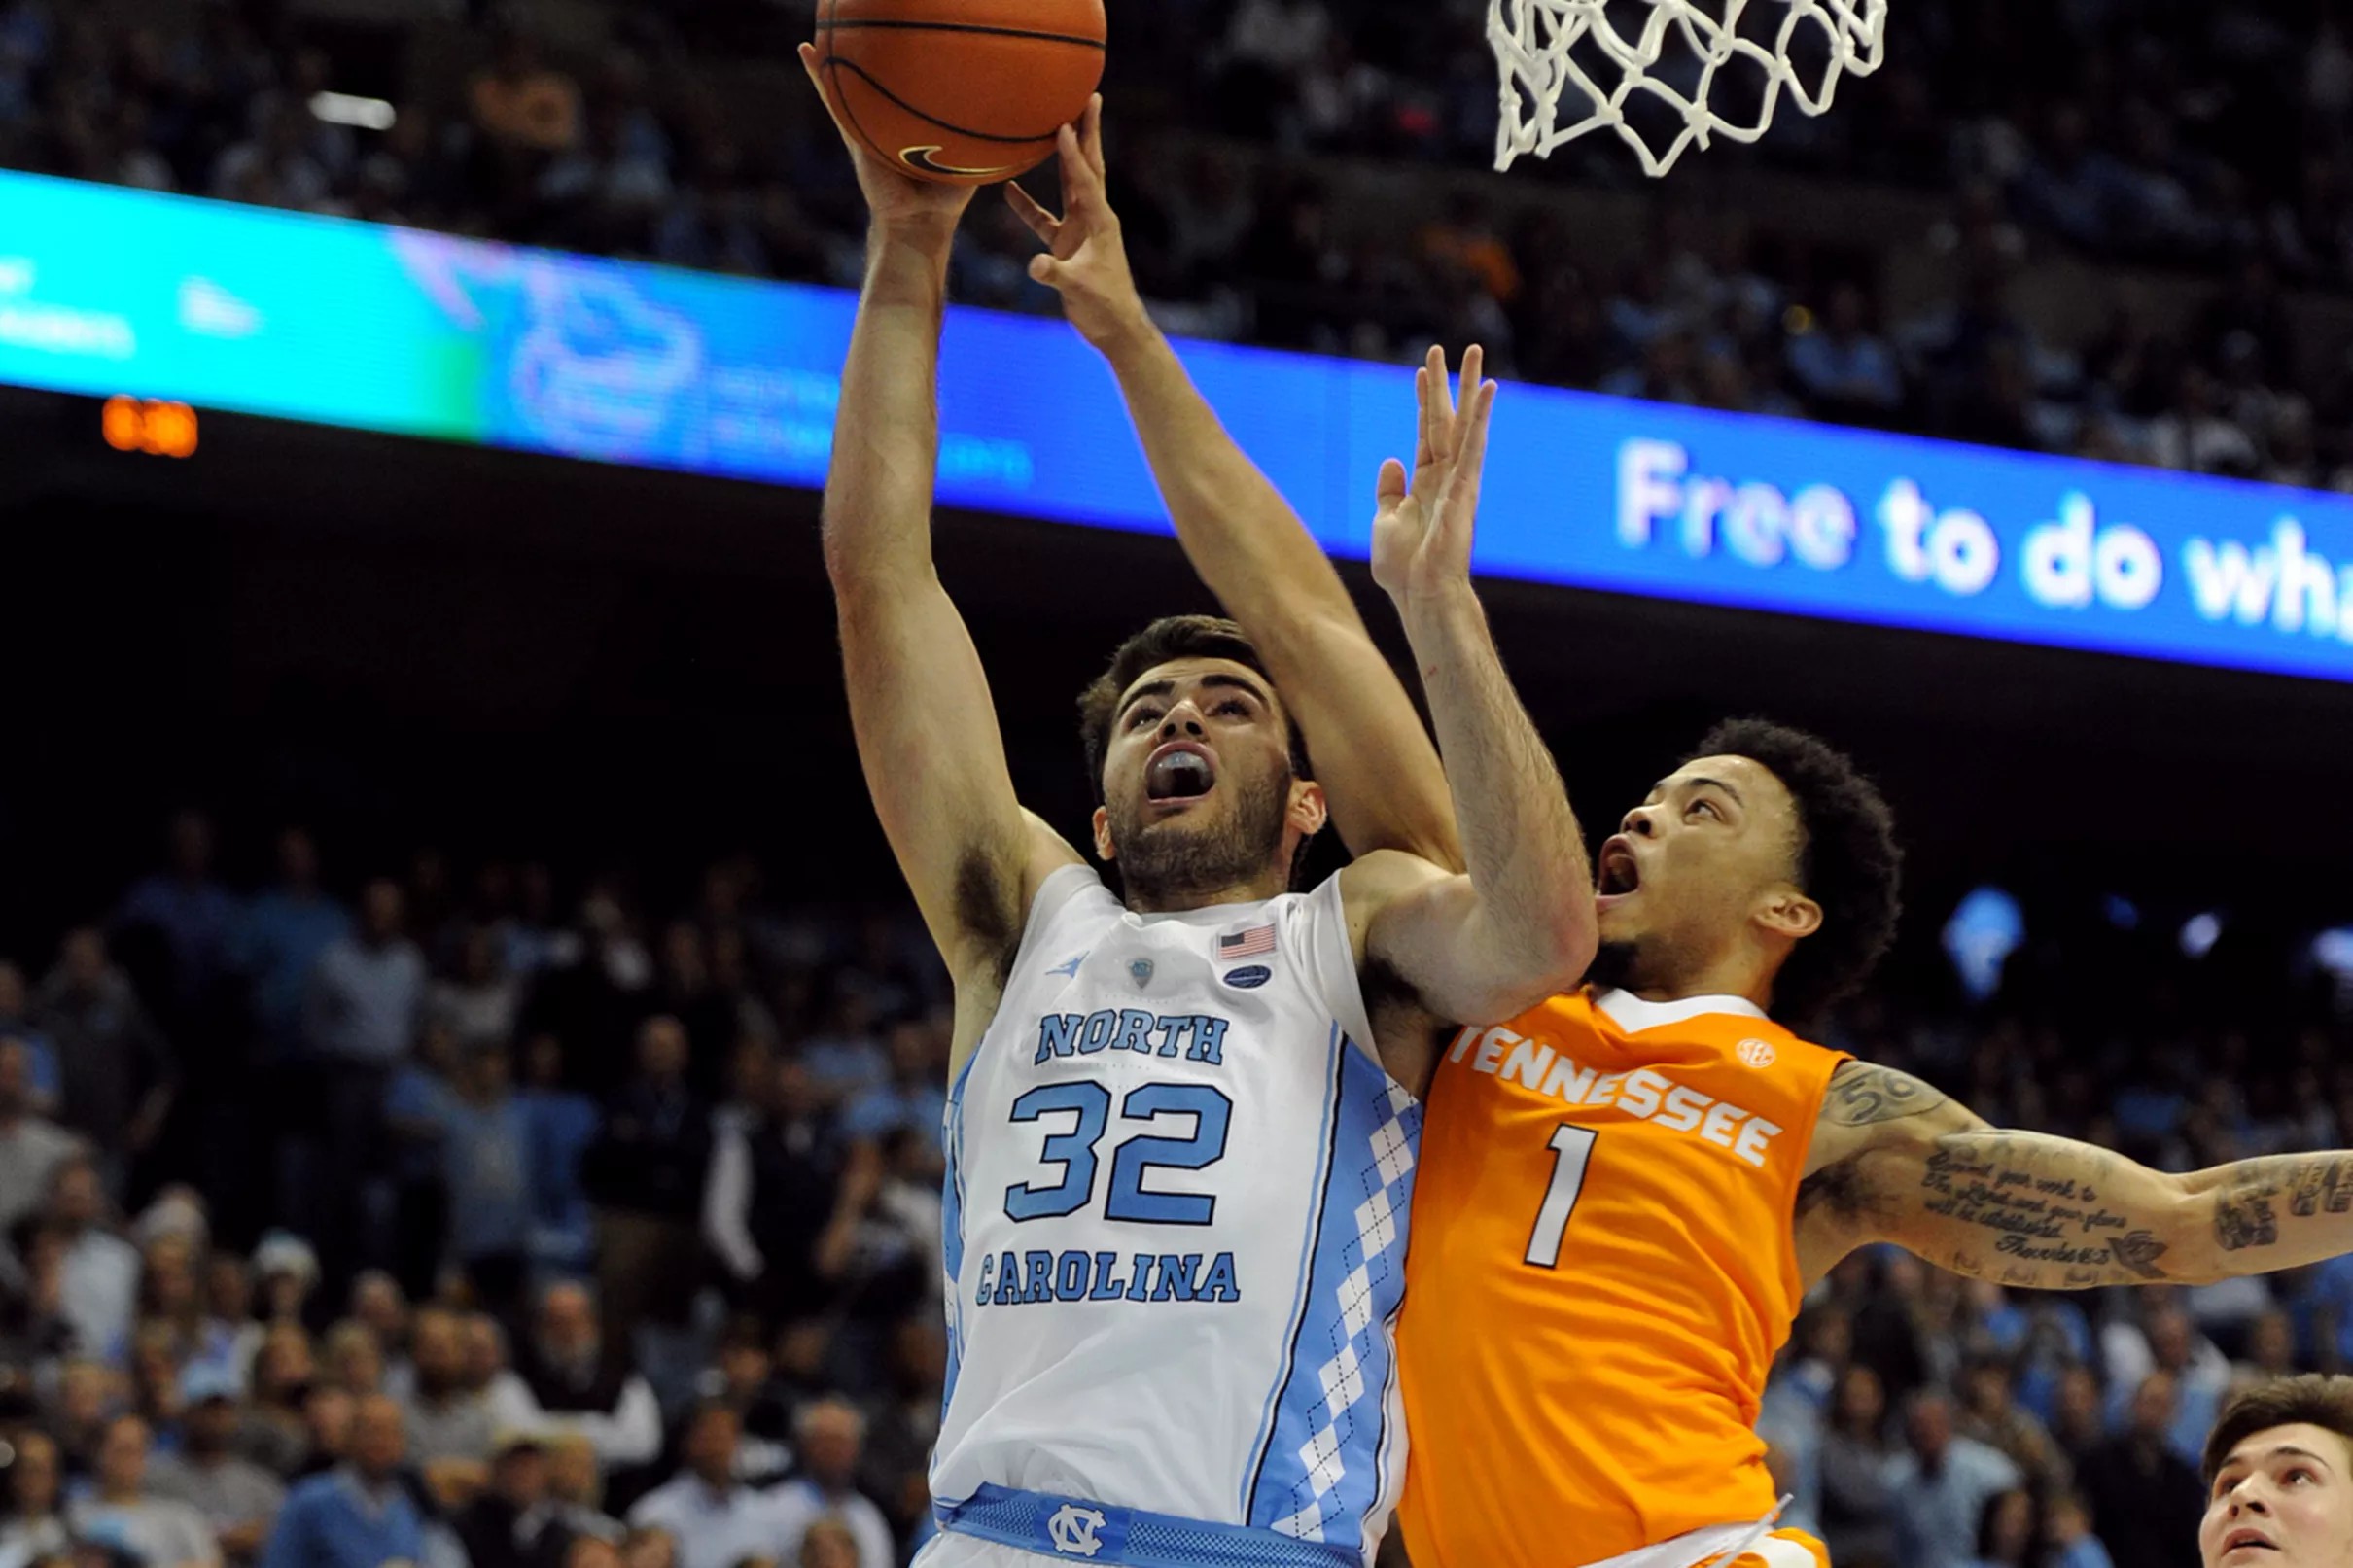 UNC Basketball vs. Tennessee Game preview